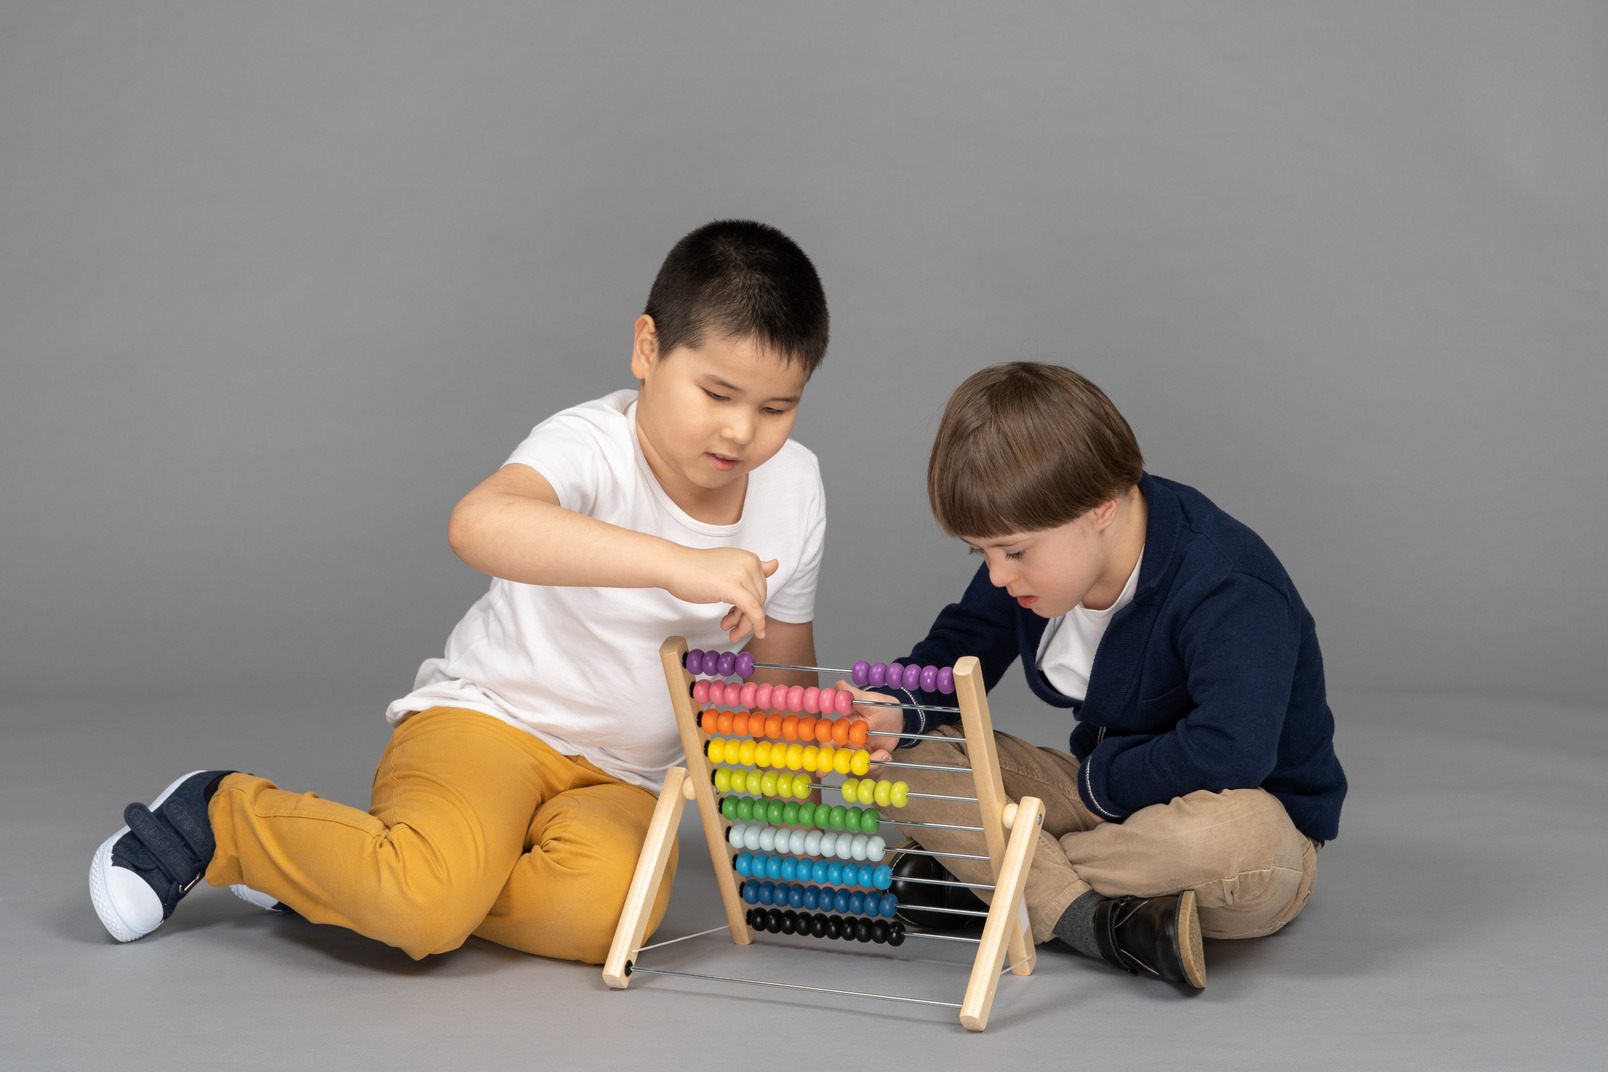 Two kids playing with colorful toy